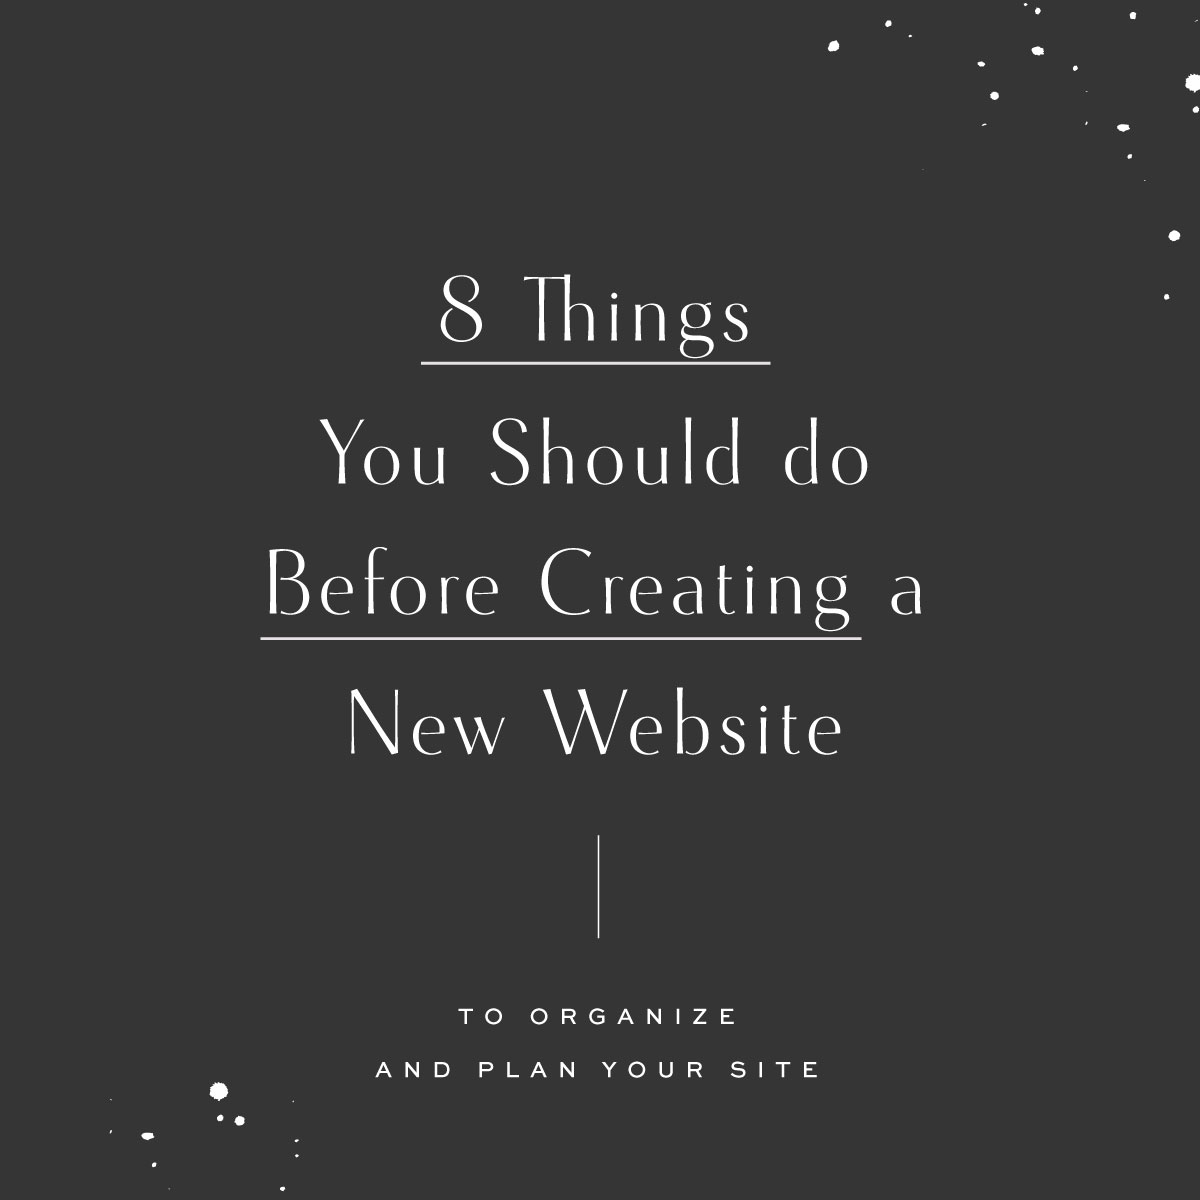 Need to Do Before Creating a Website